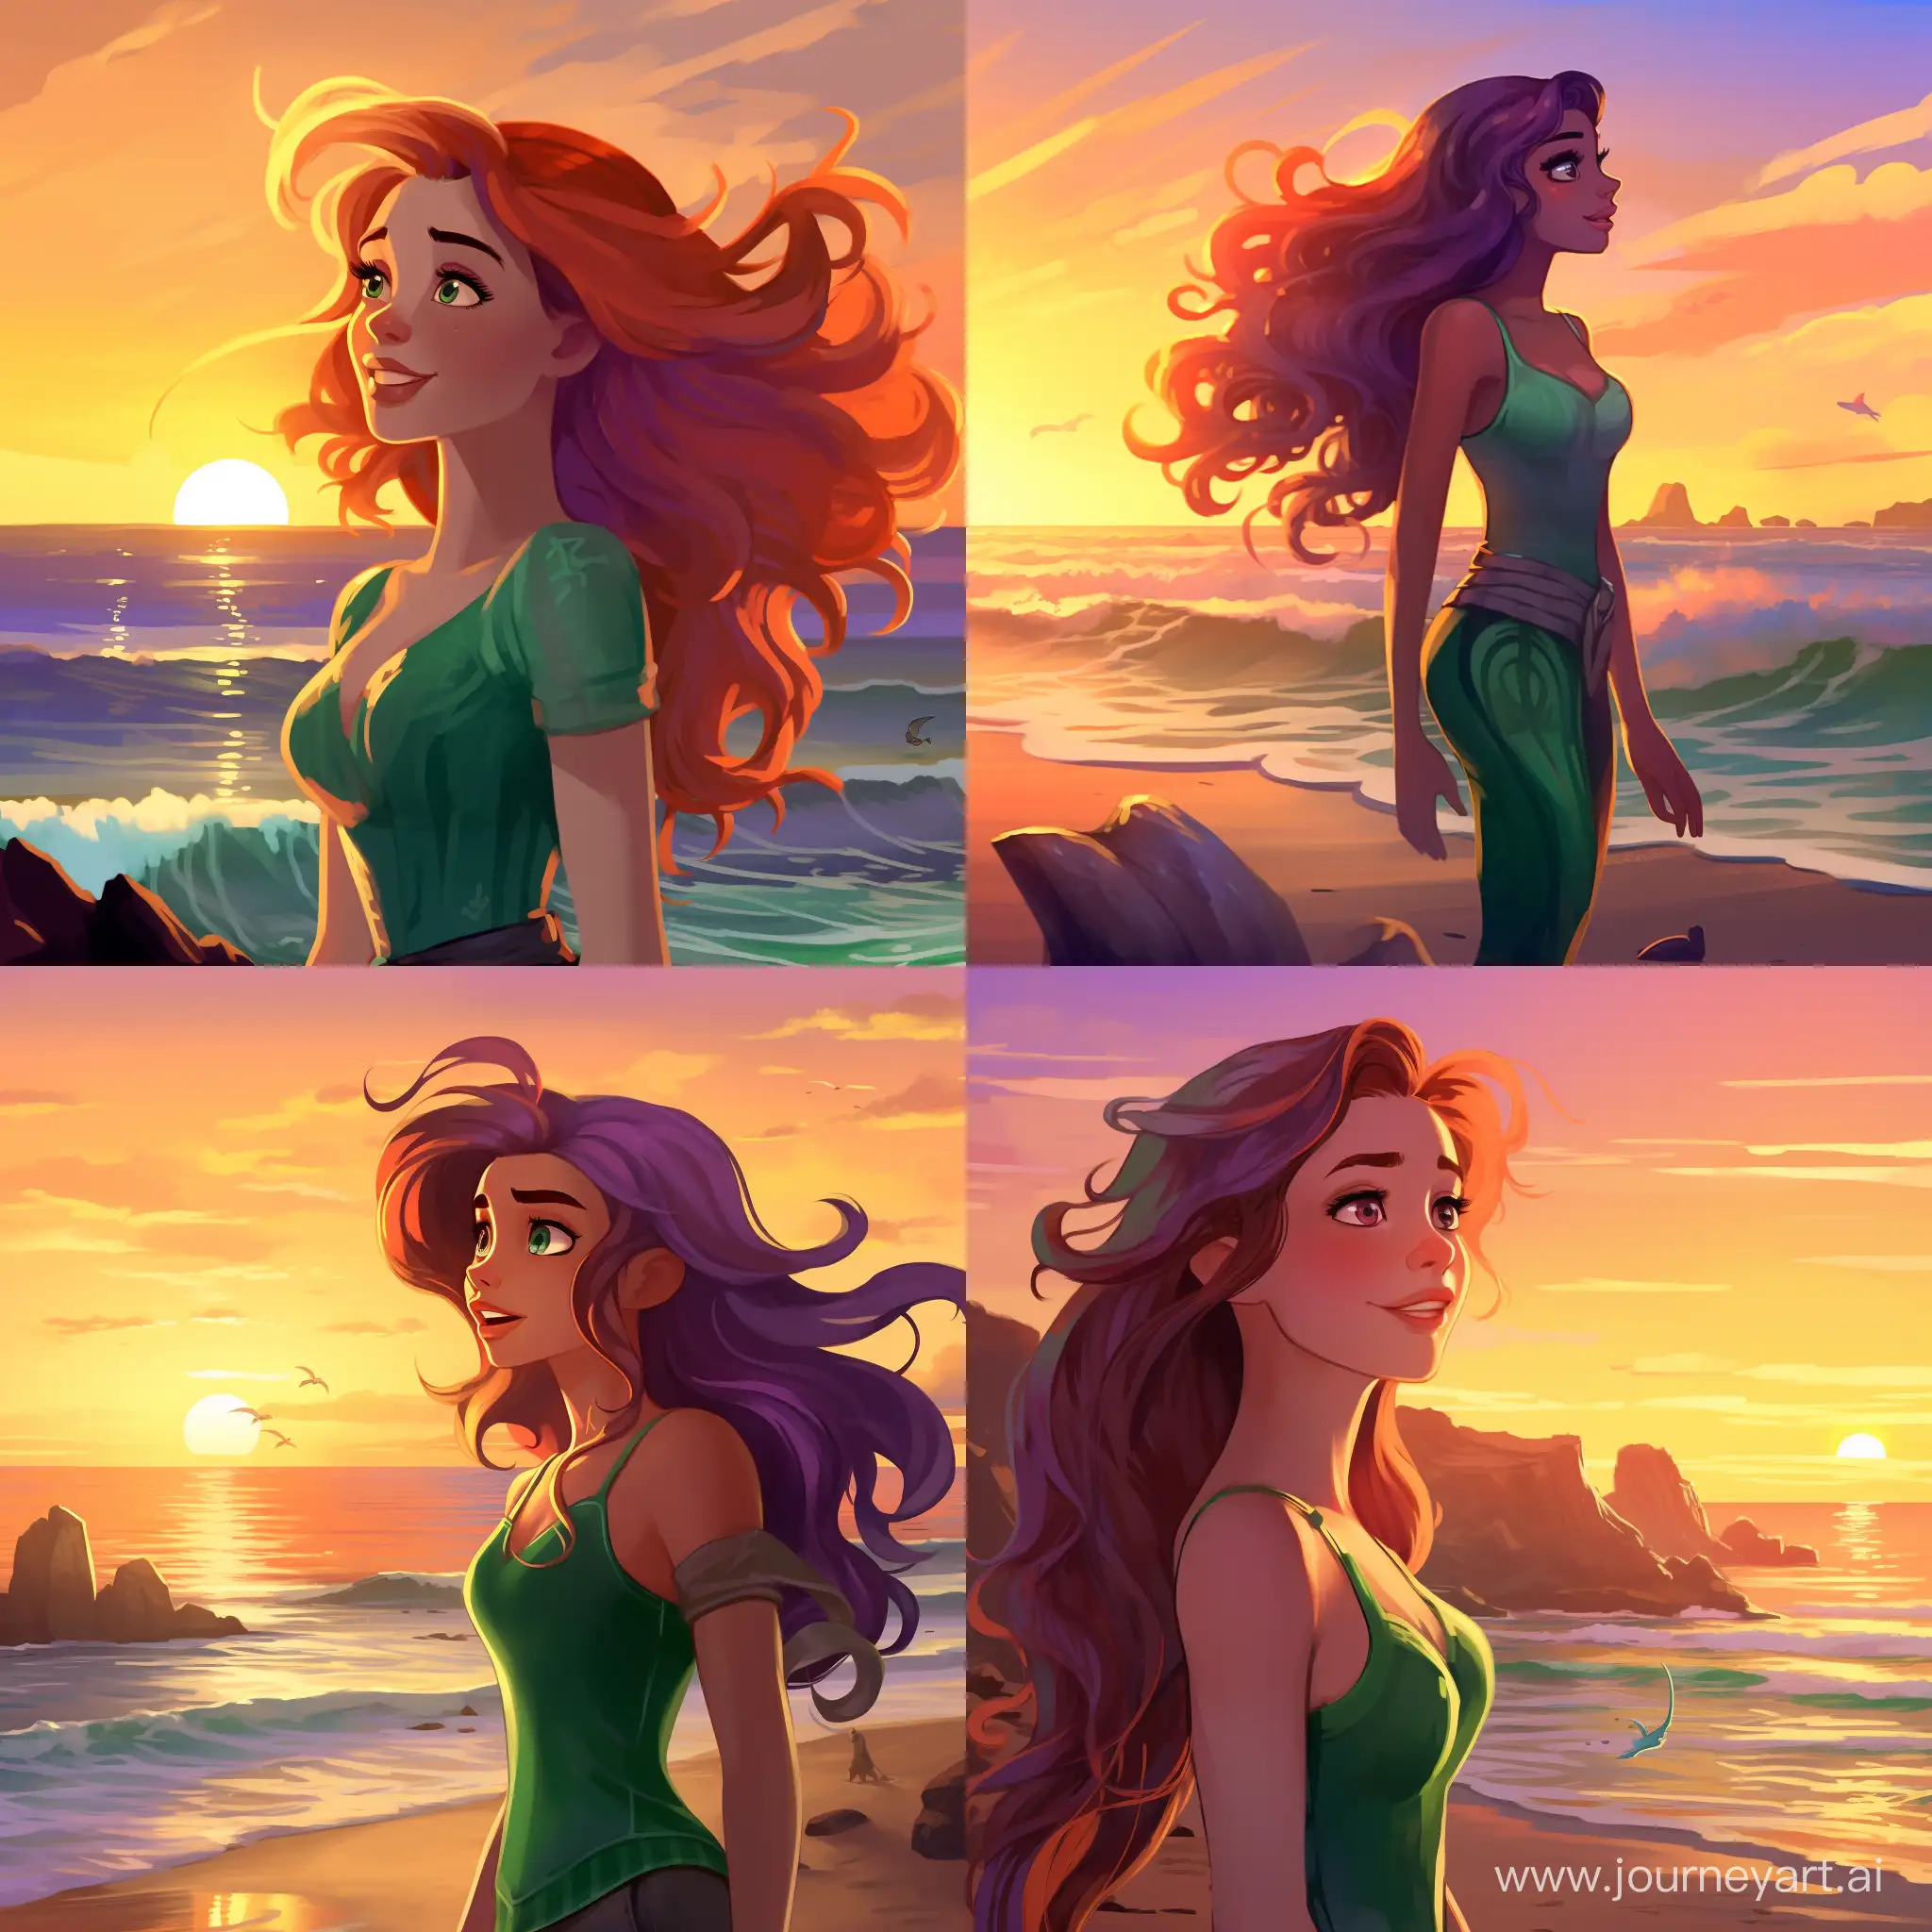 Ariel the Little Mermaid standing on the beach in Malibu, California, at sunset. She is wearing her green tail and purple top. Her hair is flowing in the wind. She is looking at the sunset and smiling. The sky is ablaze with color. The waves are crashing on the shore.